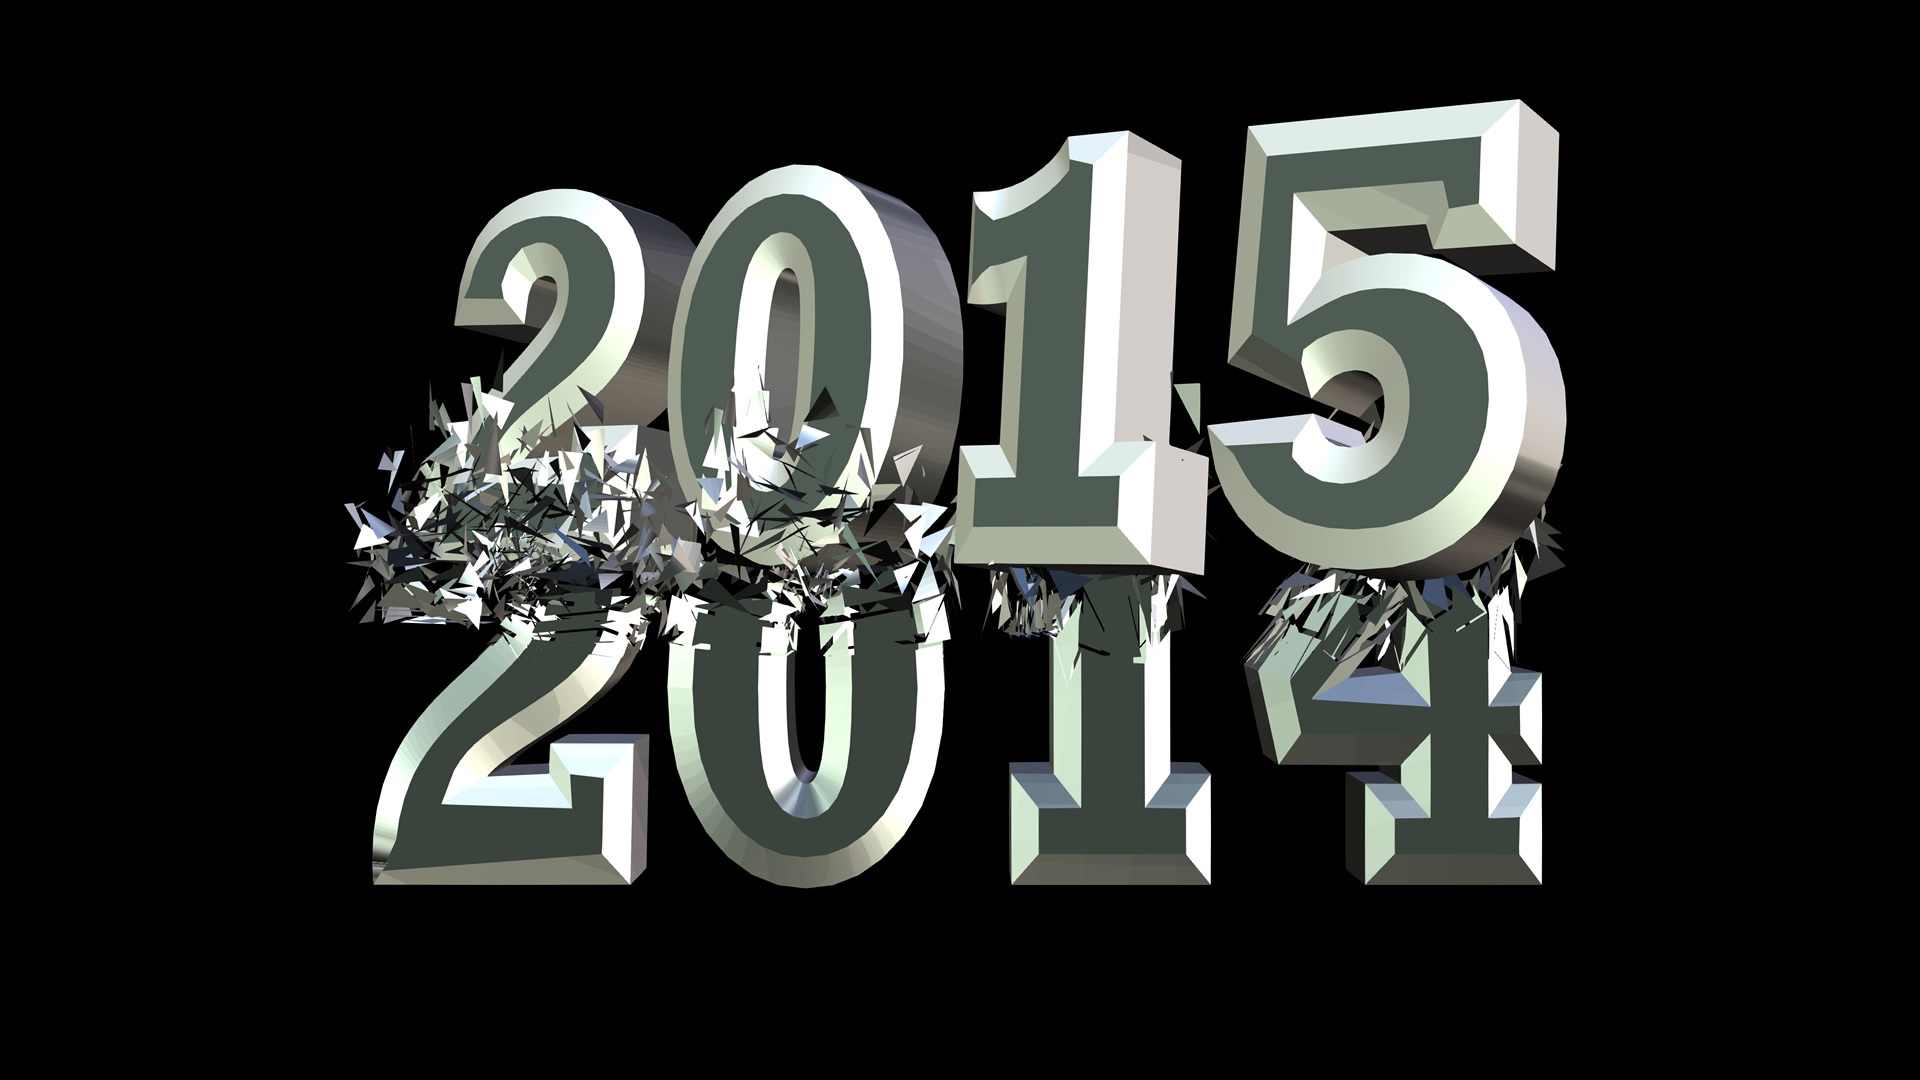 new years eve clipart 2015 - photo #50